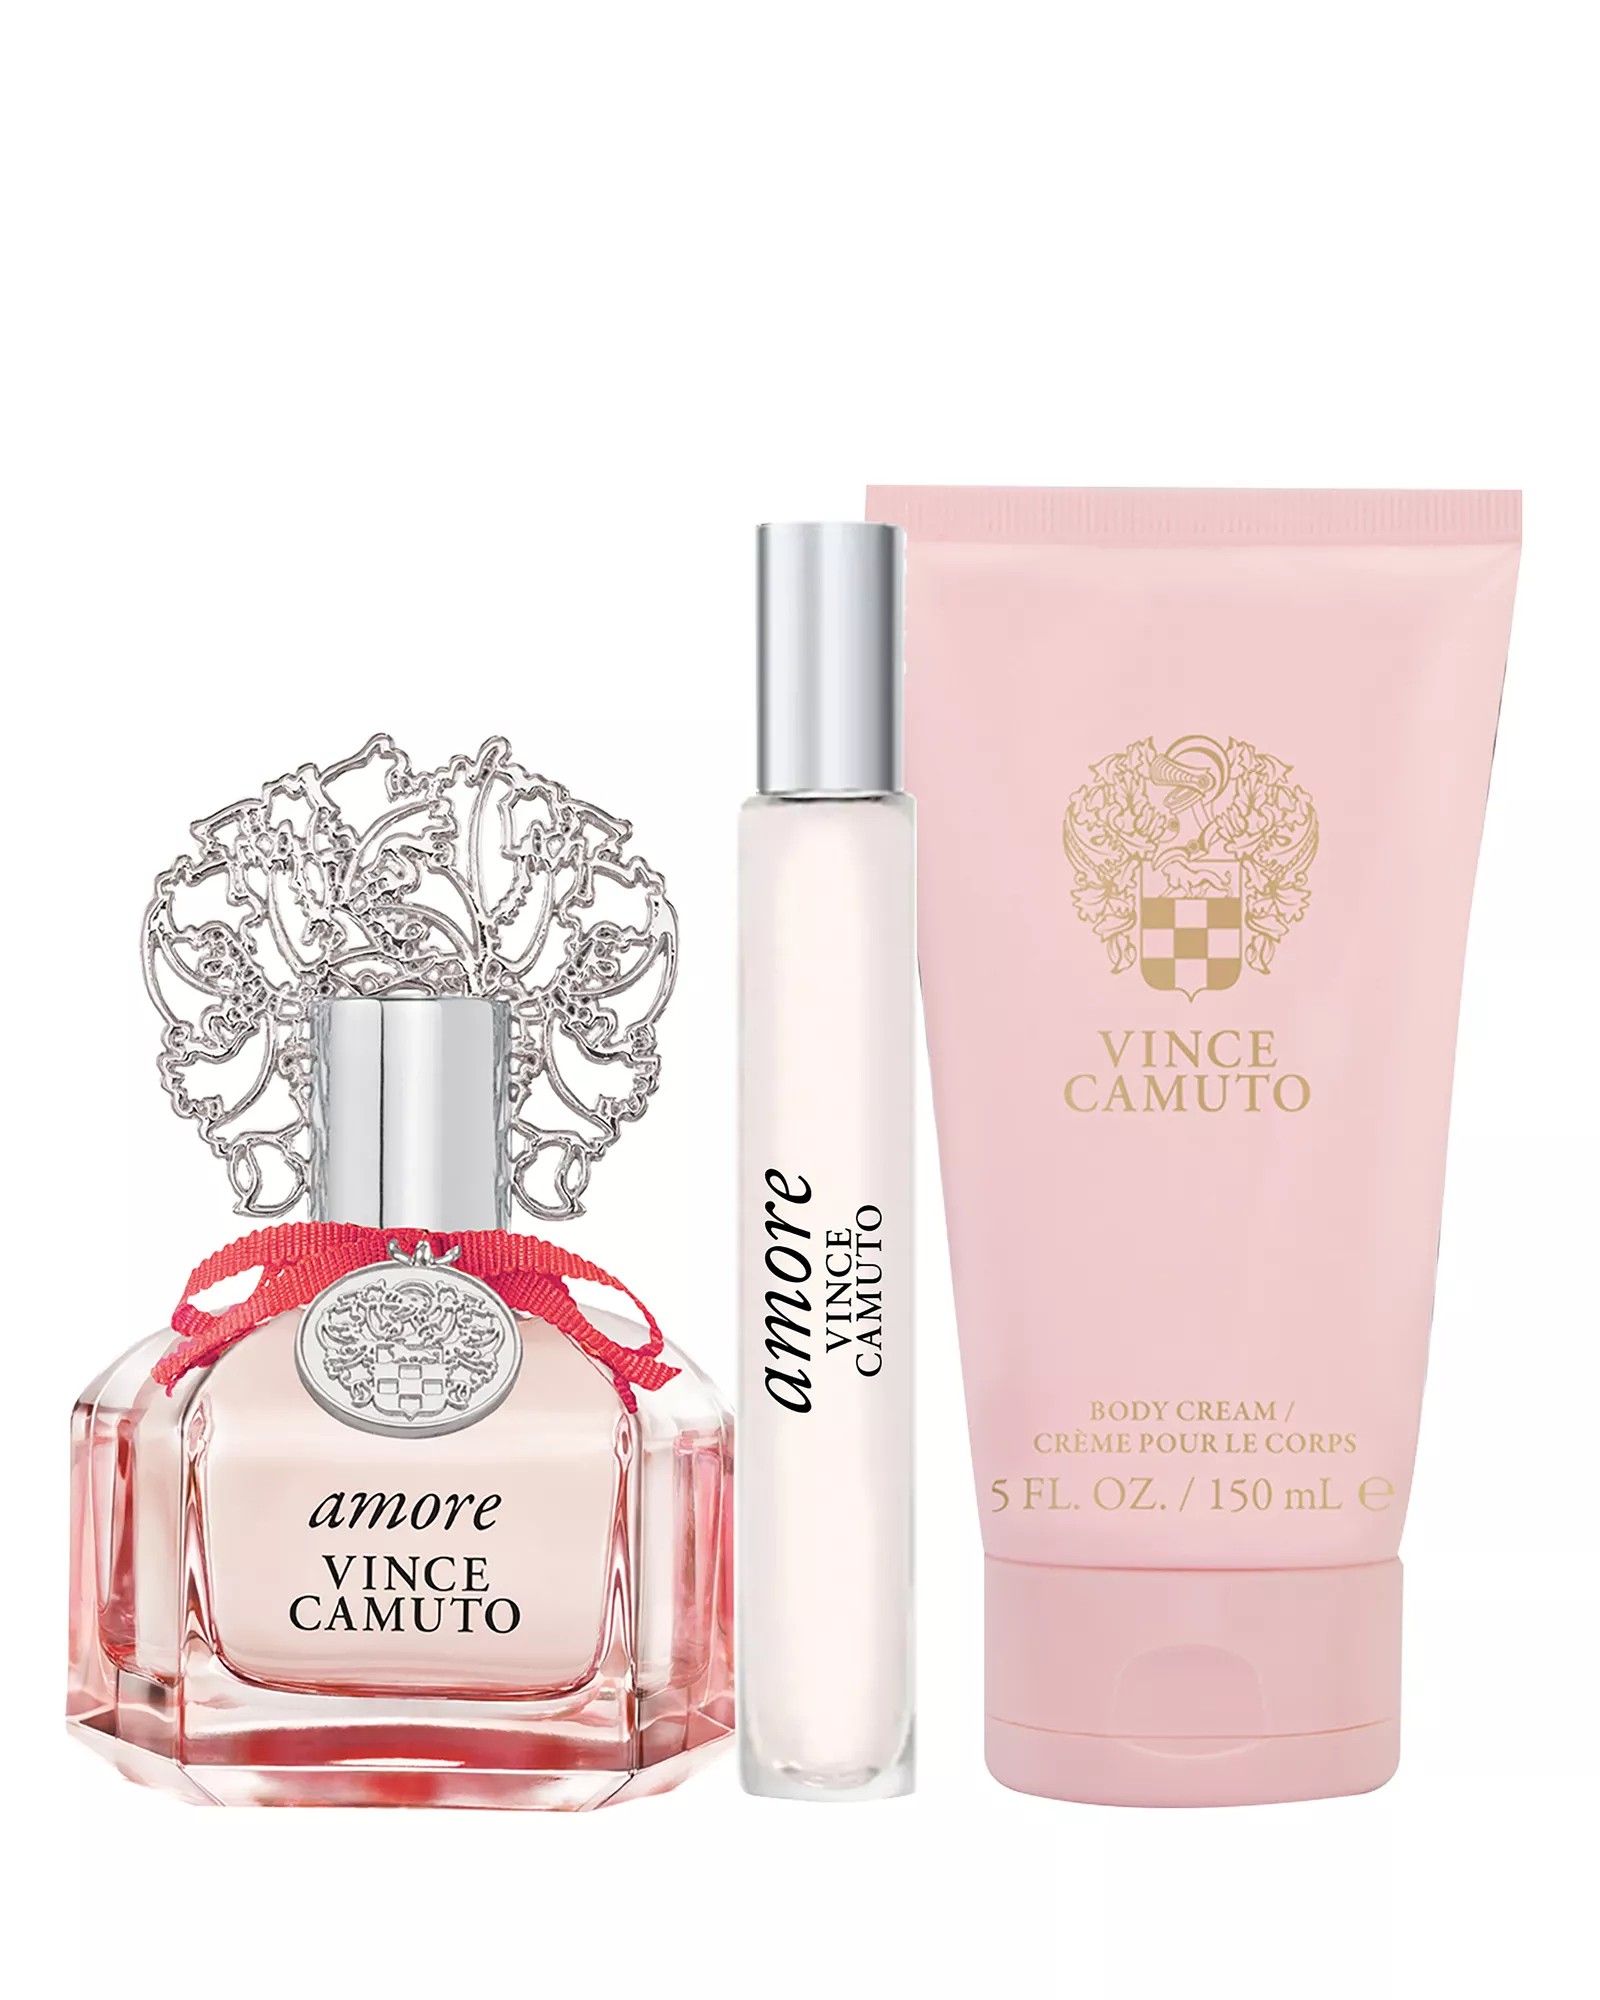 Vince Camuto Amore Perfume 3.4 oz EDP Spray for WOMEN by Vince